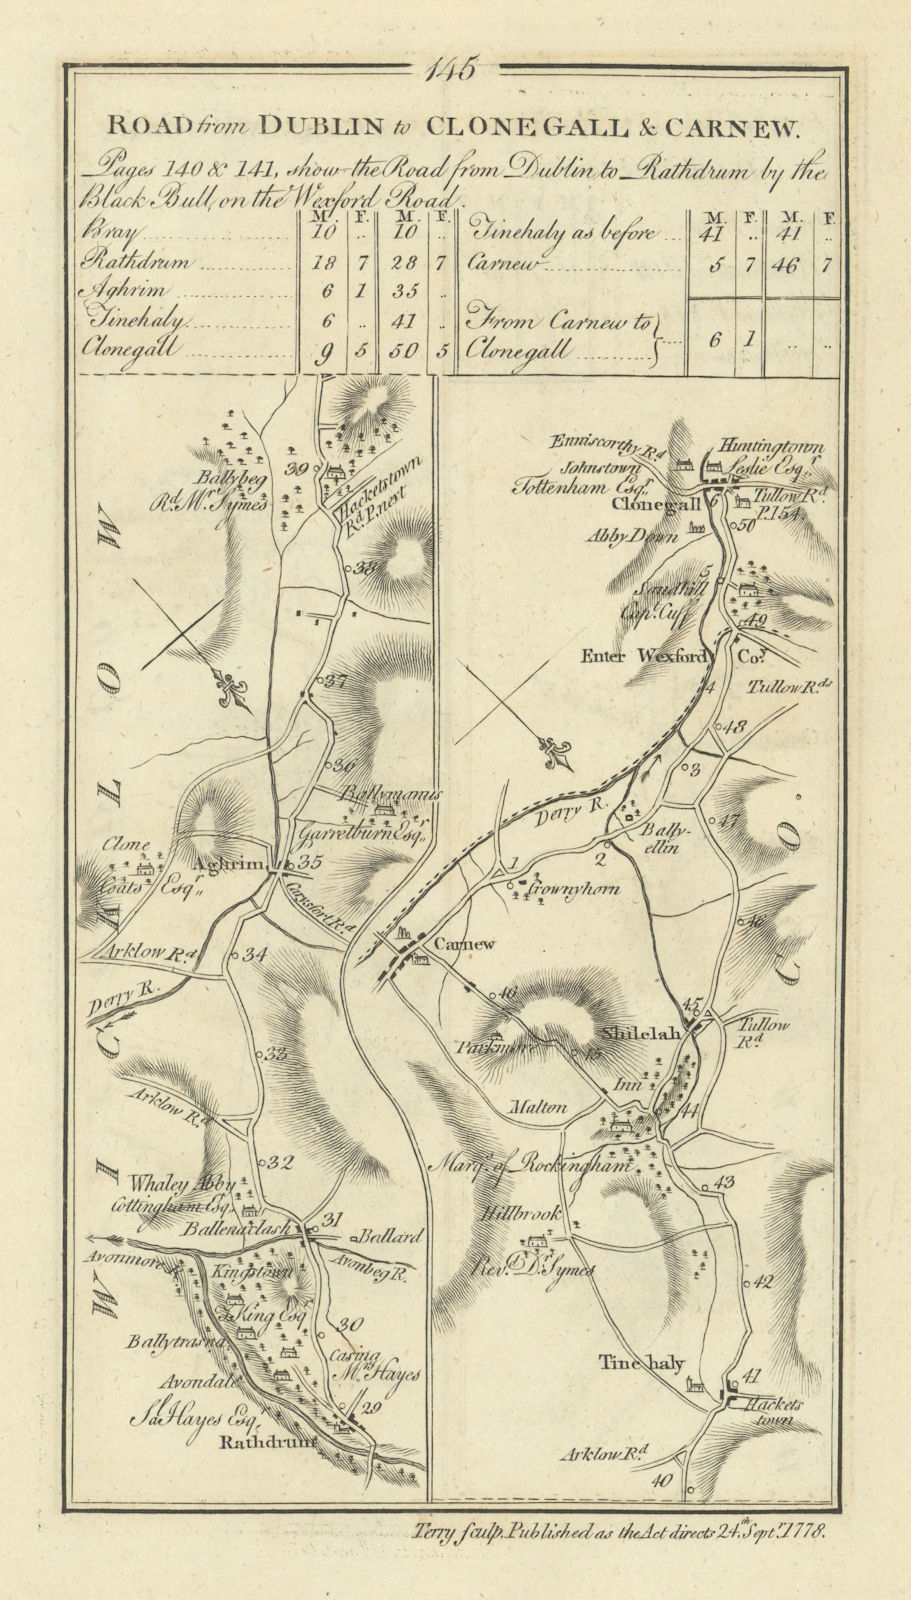 Associate Product #145 Dublin to Clonegall & Carnew. Aughrim Rathdrum. TAYLOR/SKINNER 1778 map